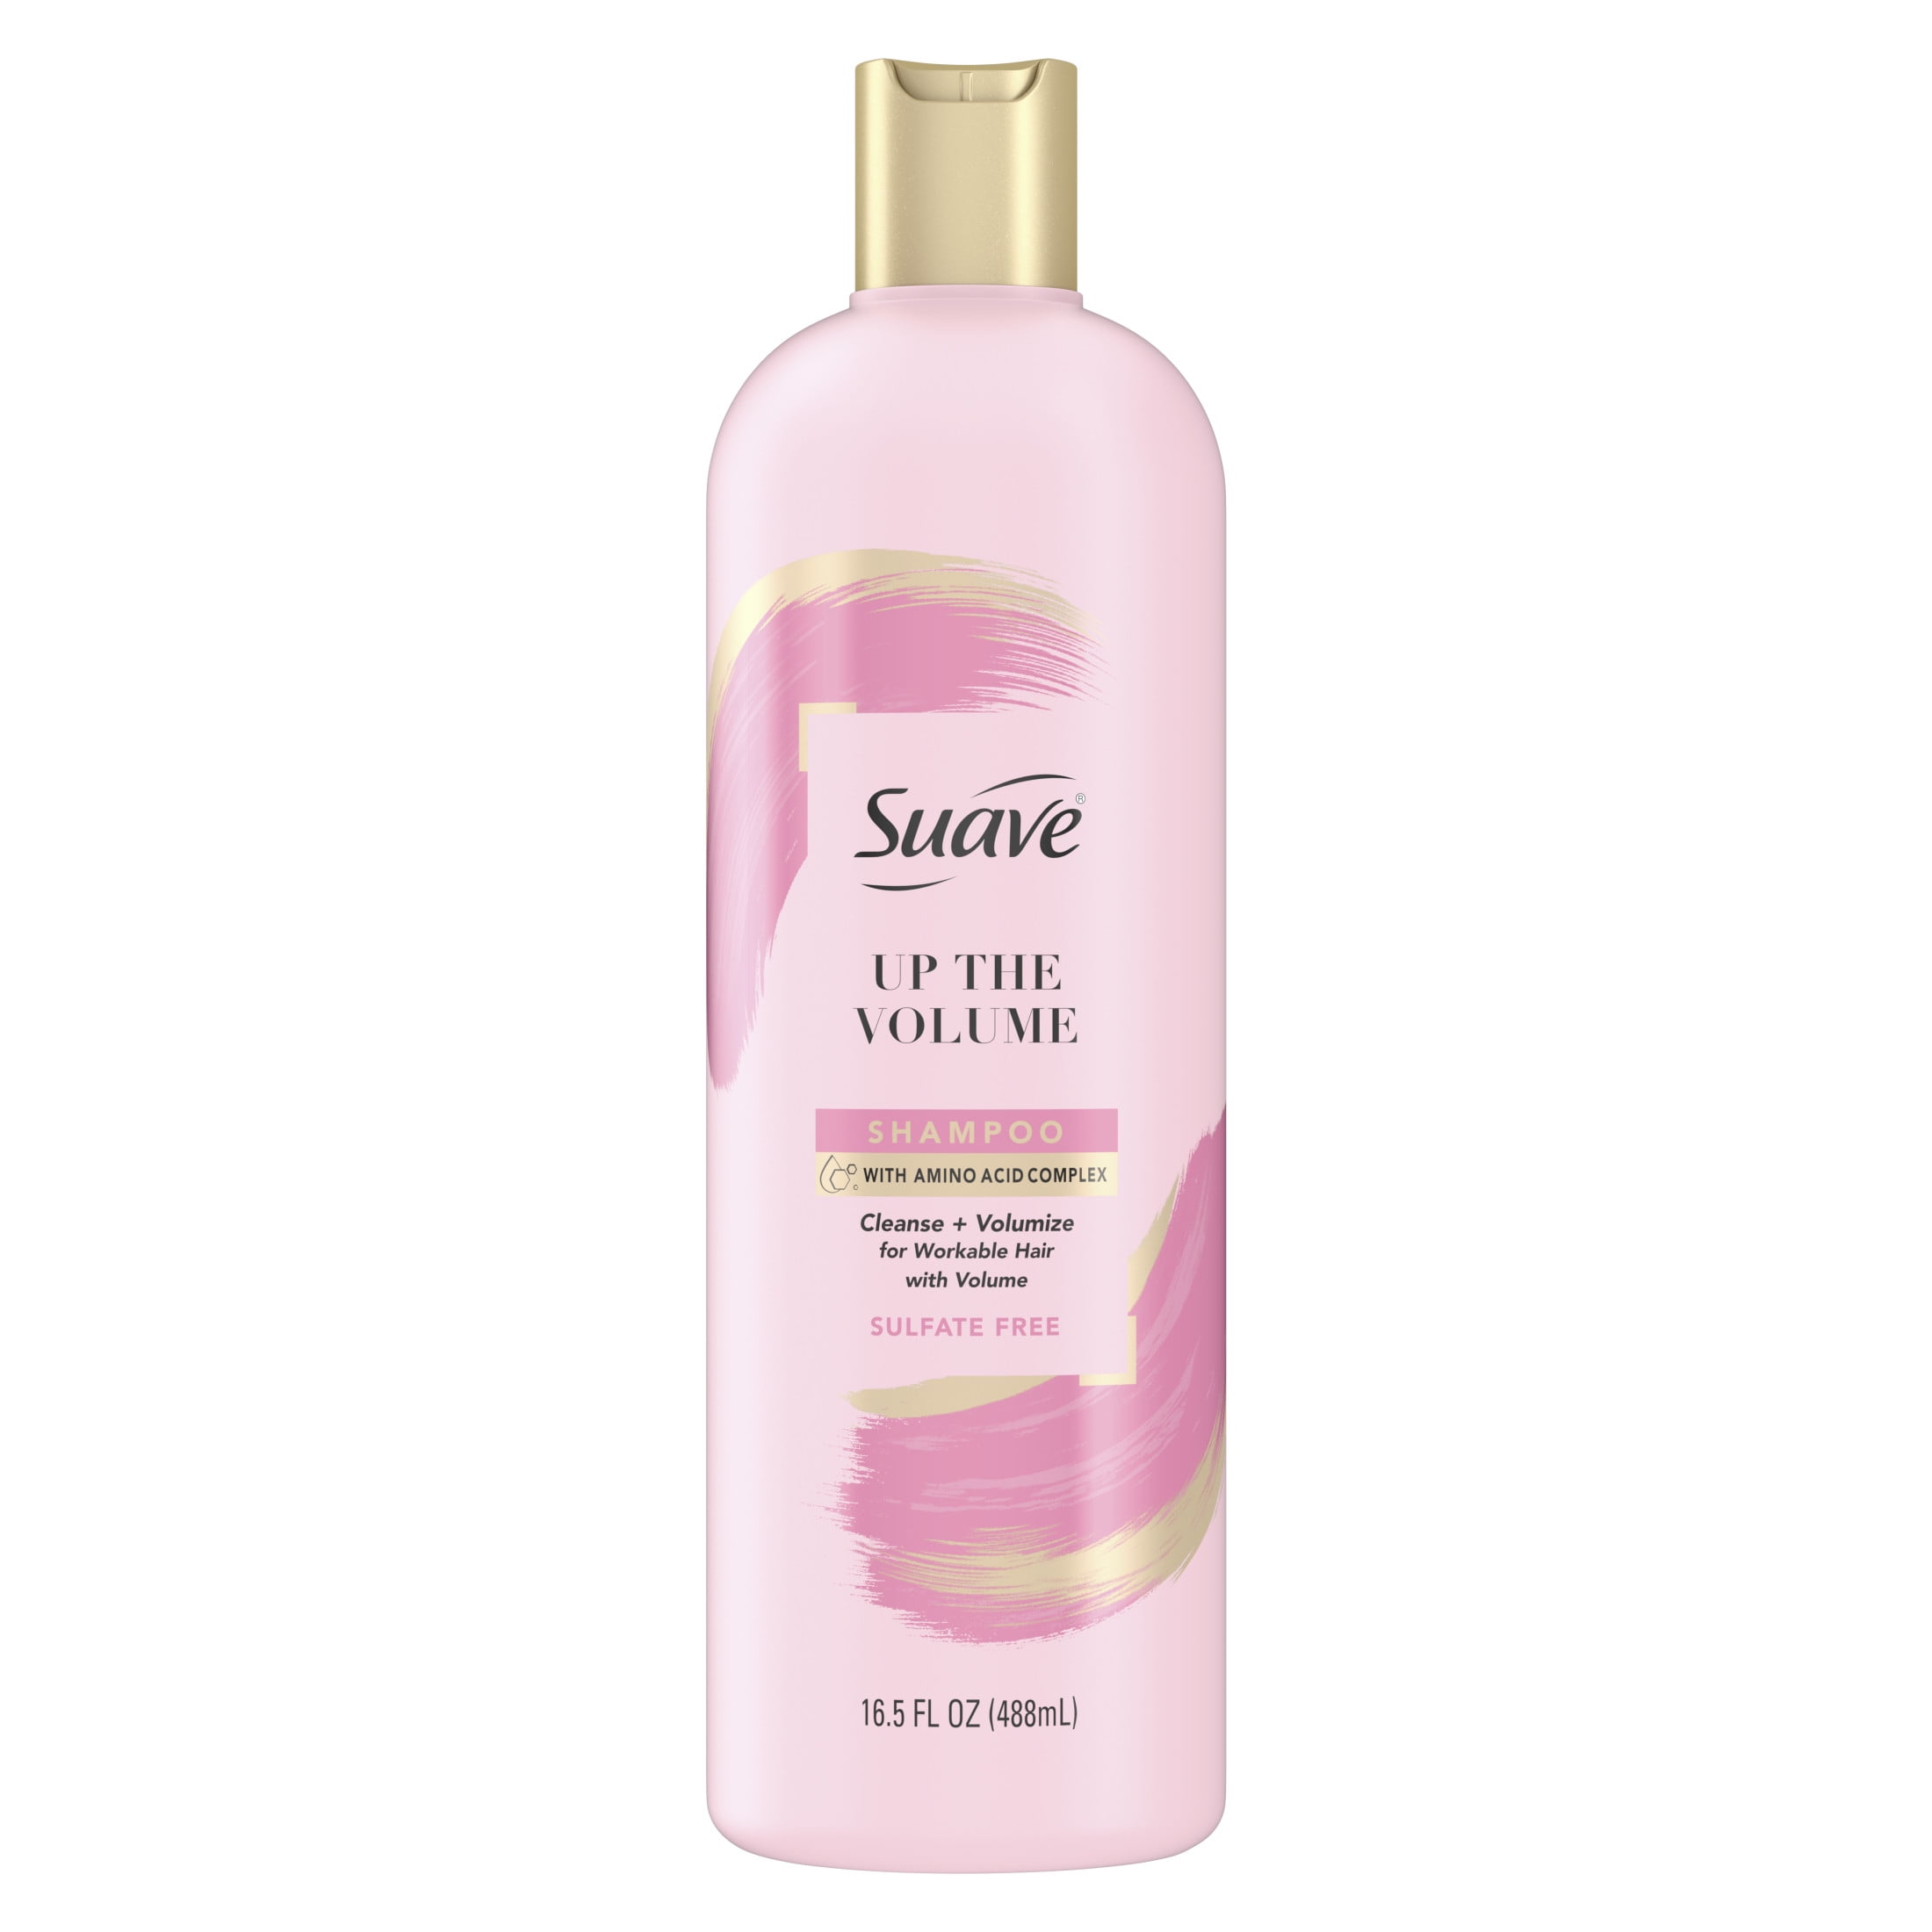 Sanselig digtere global Suave Volumizing Shampoo Pink up the Volume Frizz Control Sulfate-Free for  Fine, Flat Hair, 16.5 oz - Walmart.com